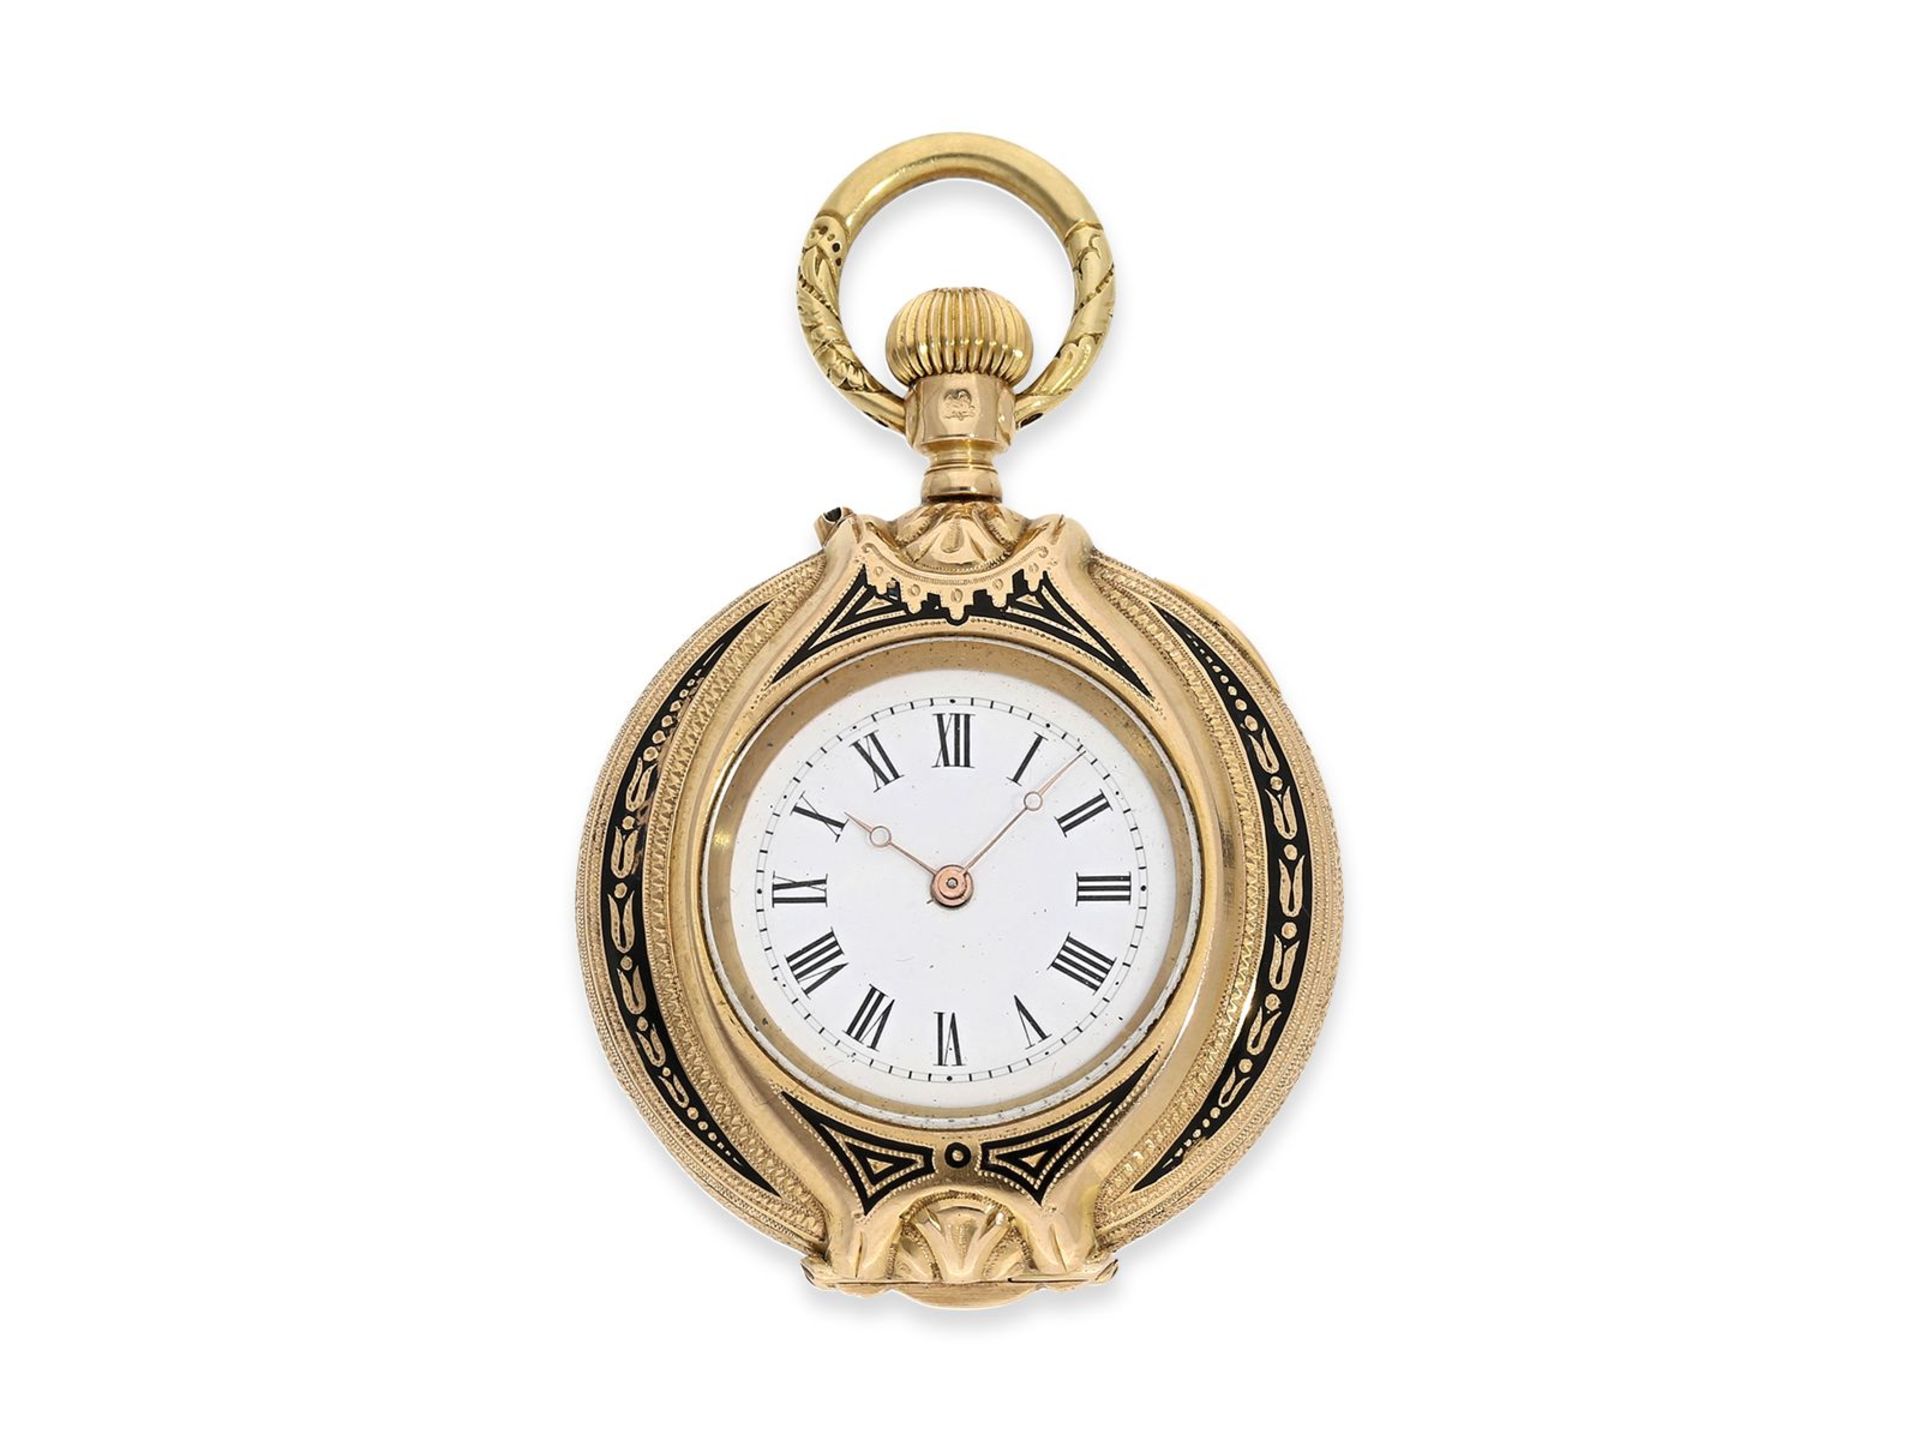 Pocket watch/ form watch: rare gold/ enamel form watch with diamonds, ca. 1880 - Image 2 of 4